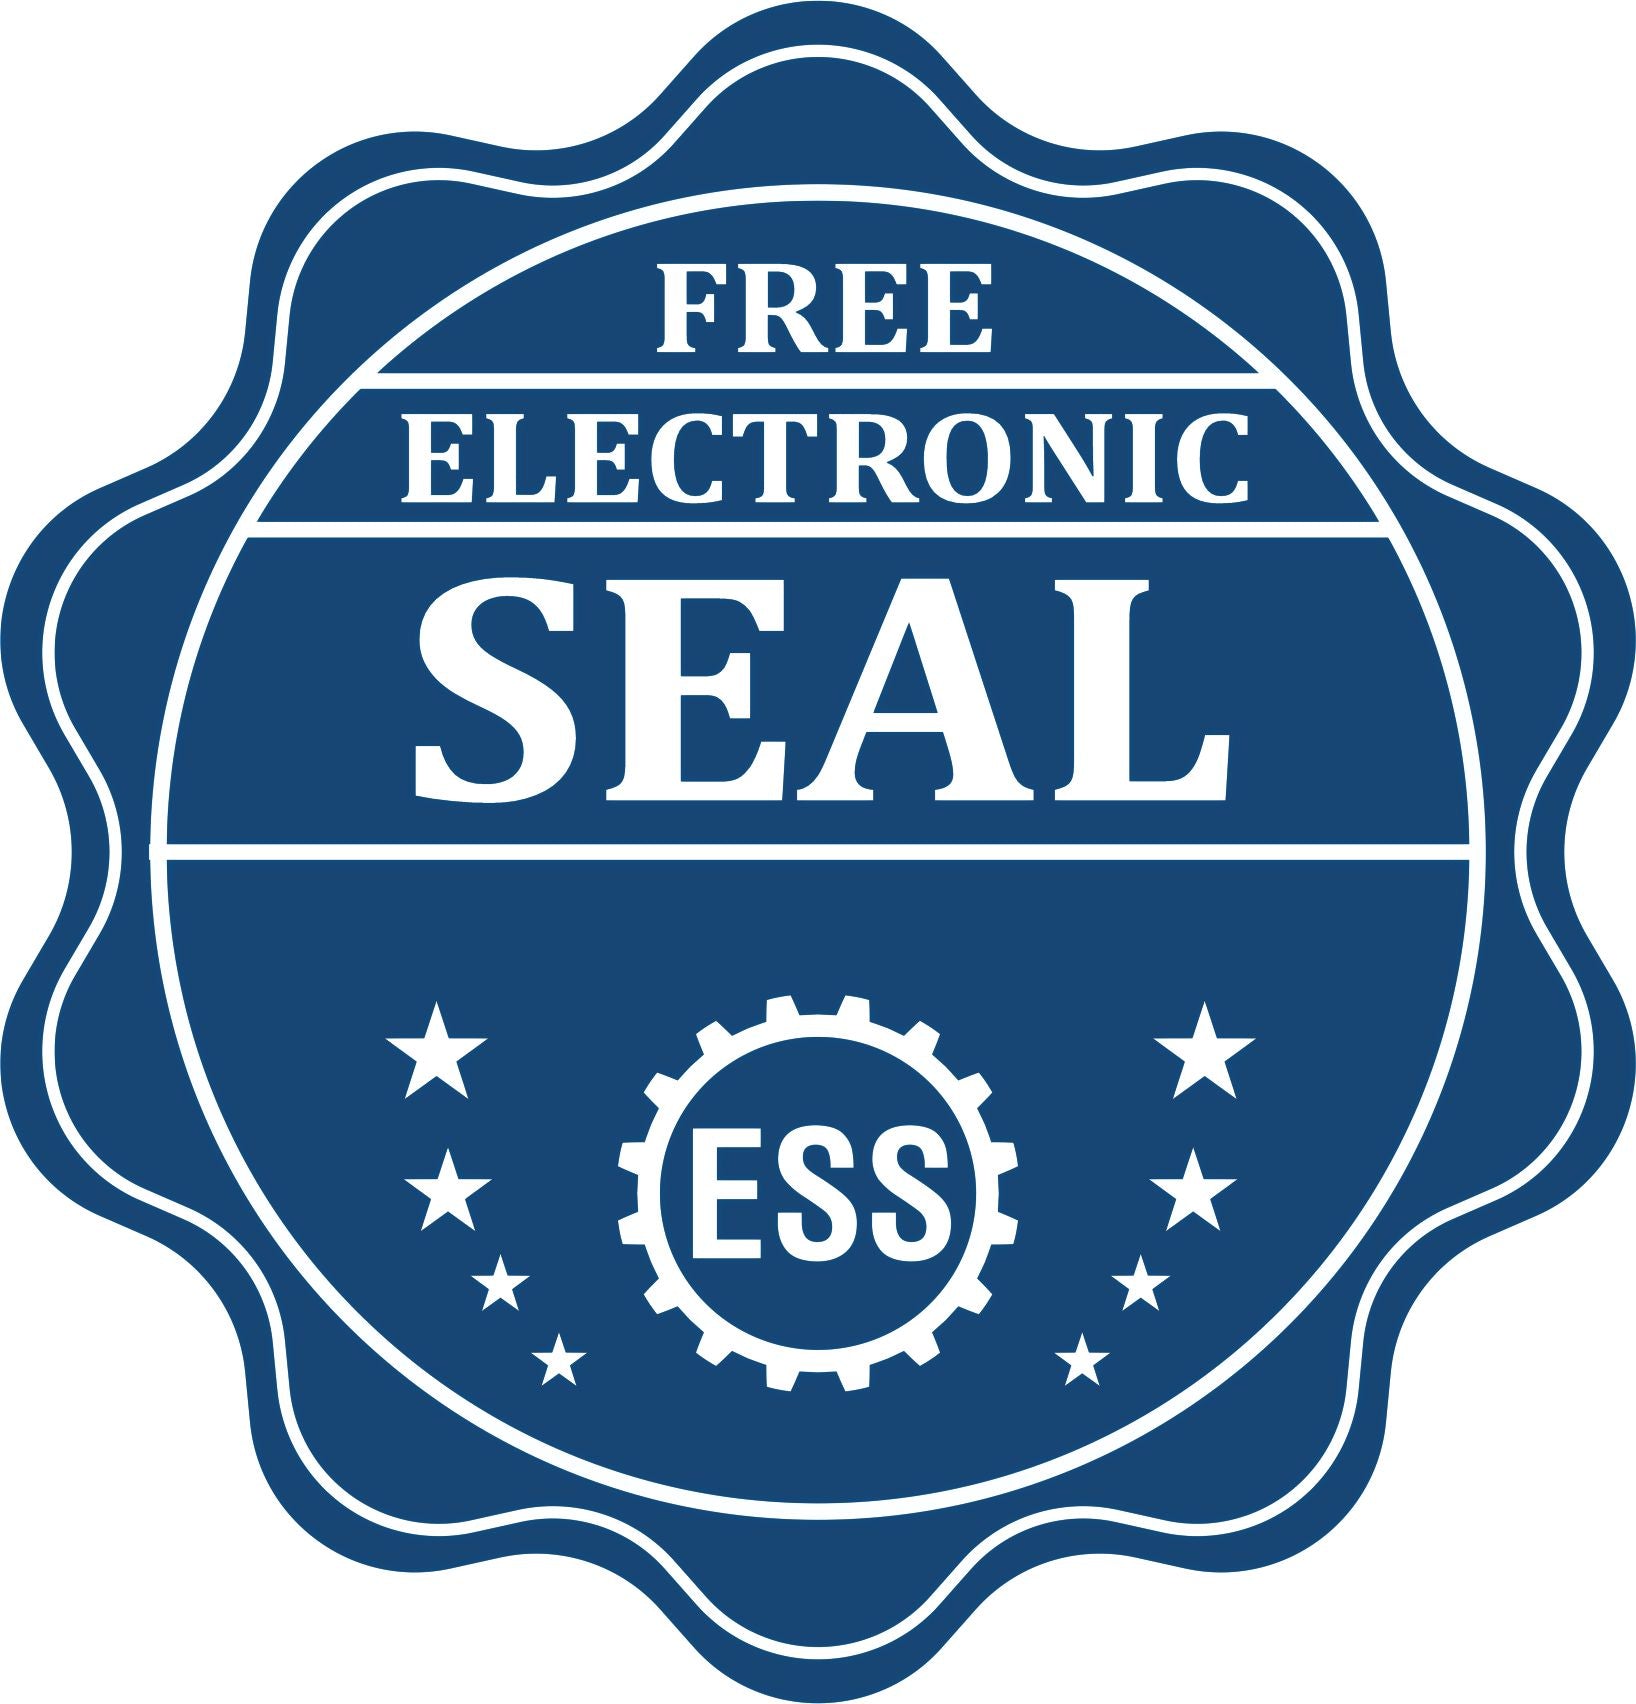 A badge showing a free electronic seal for the Gift North Dakota Architect Seal with stars and the ESS gear on the emblem.